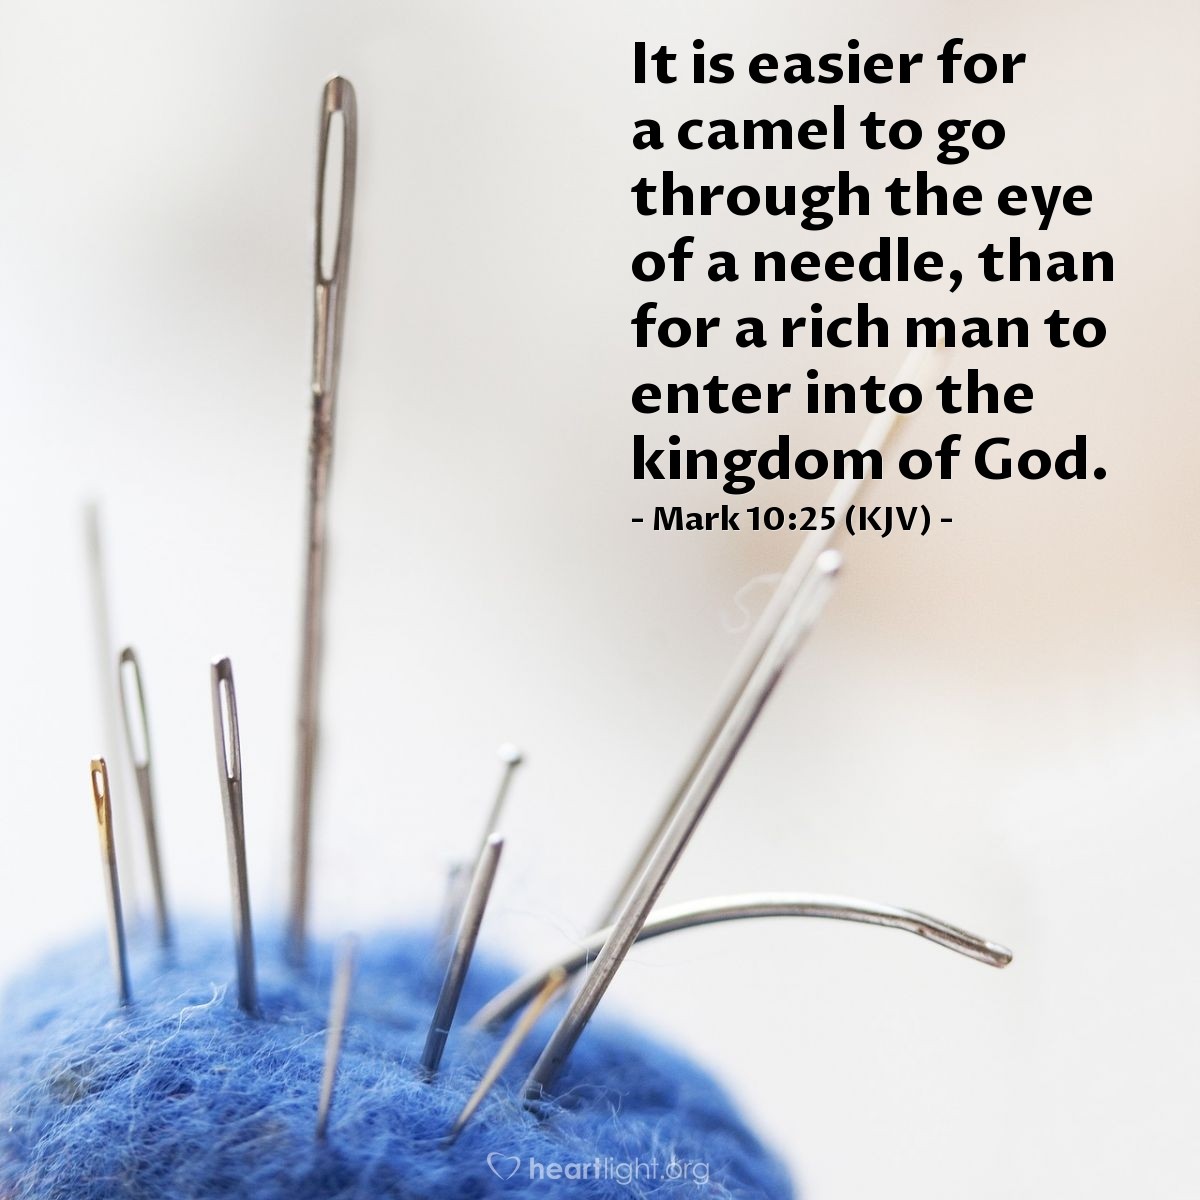 Illustration of Mark 10:25 (KJV) — It is easier for a camel to go through the eye of a needle, than for a rich man to enter into the kingdom of God.